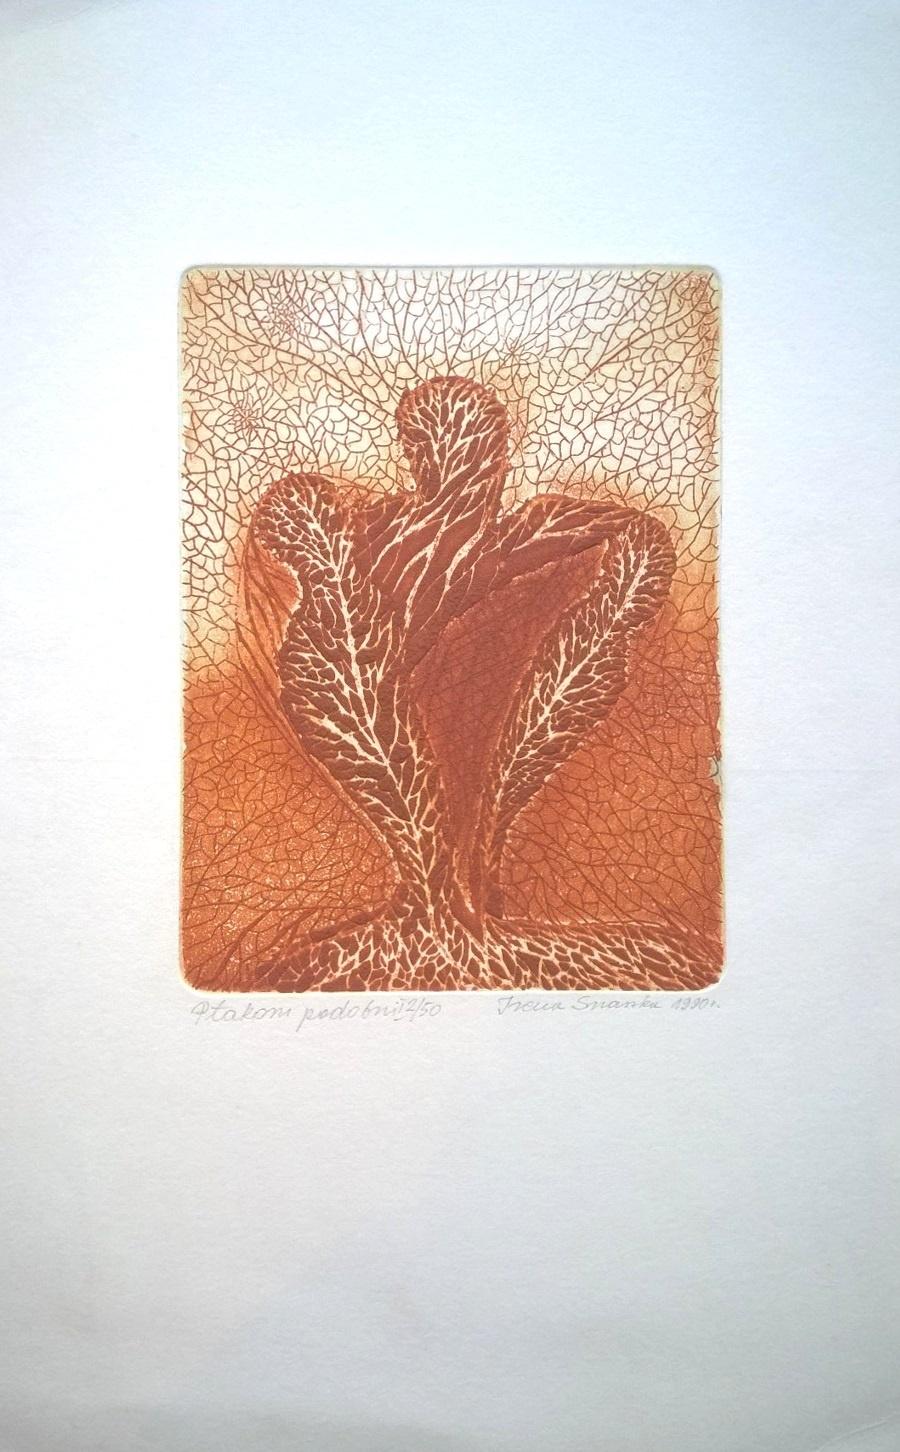 Similar to birds - XX Century, Abstract Etching Print, Organic Shapes